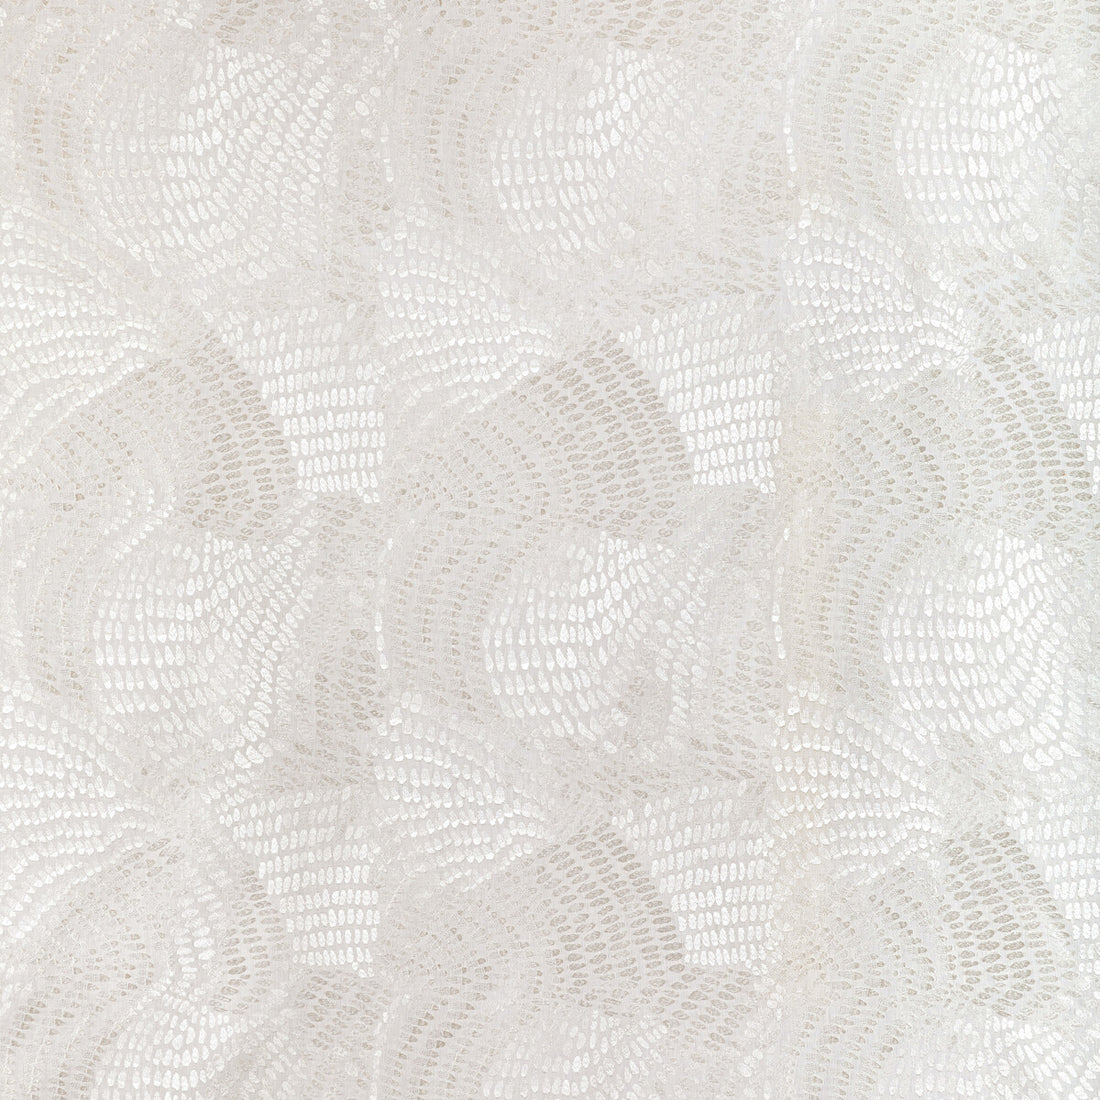 Toro Sheer fabric in ivory color - pattern 2021125.1.0 - by Lee Jofa in the Summerland collection